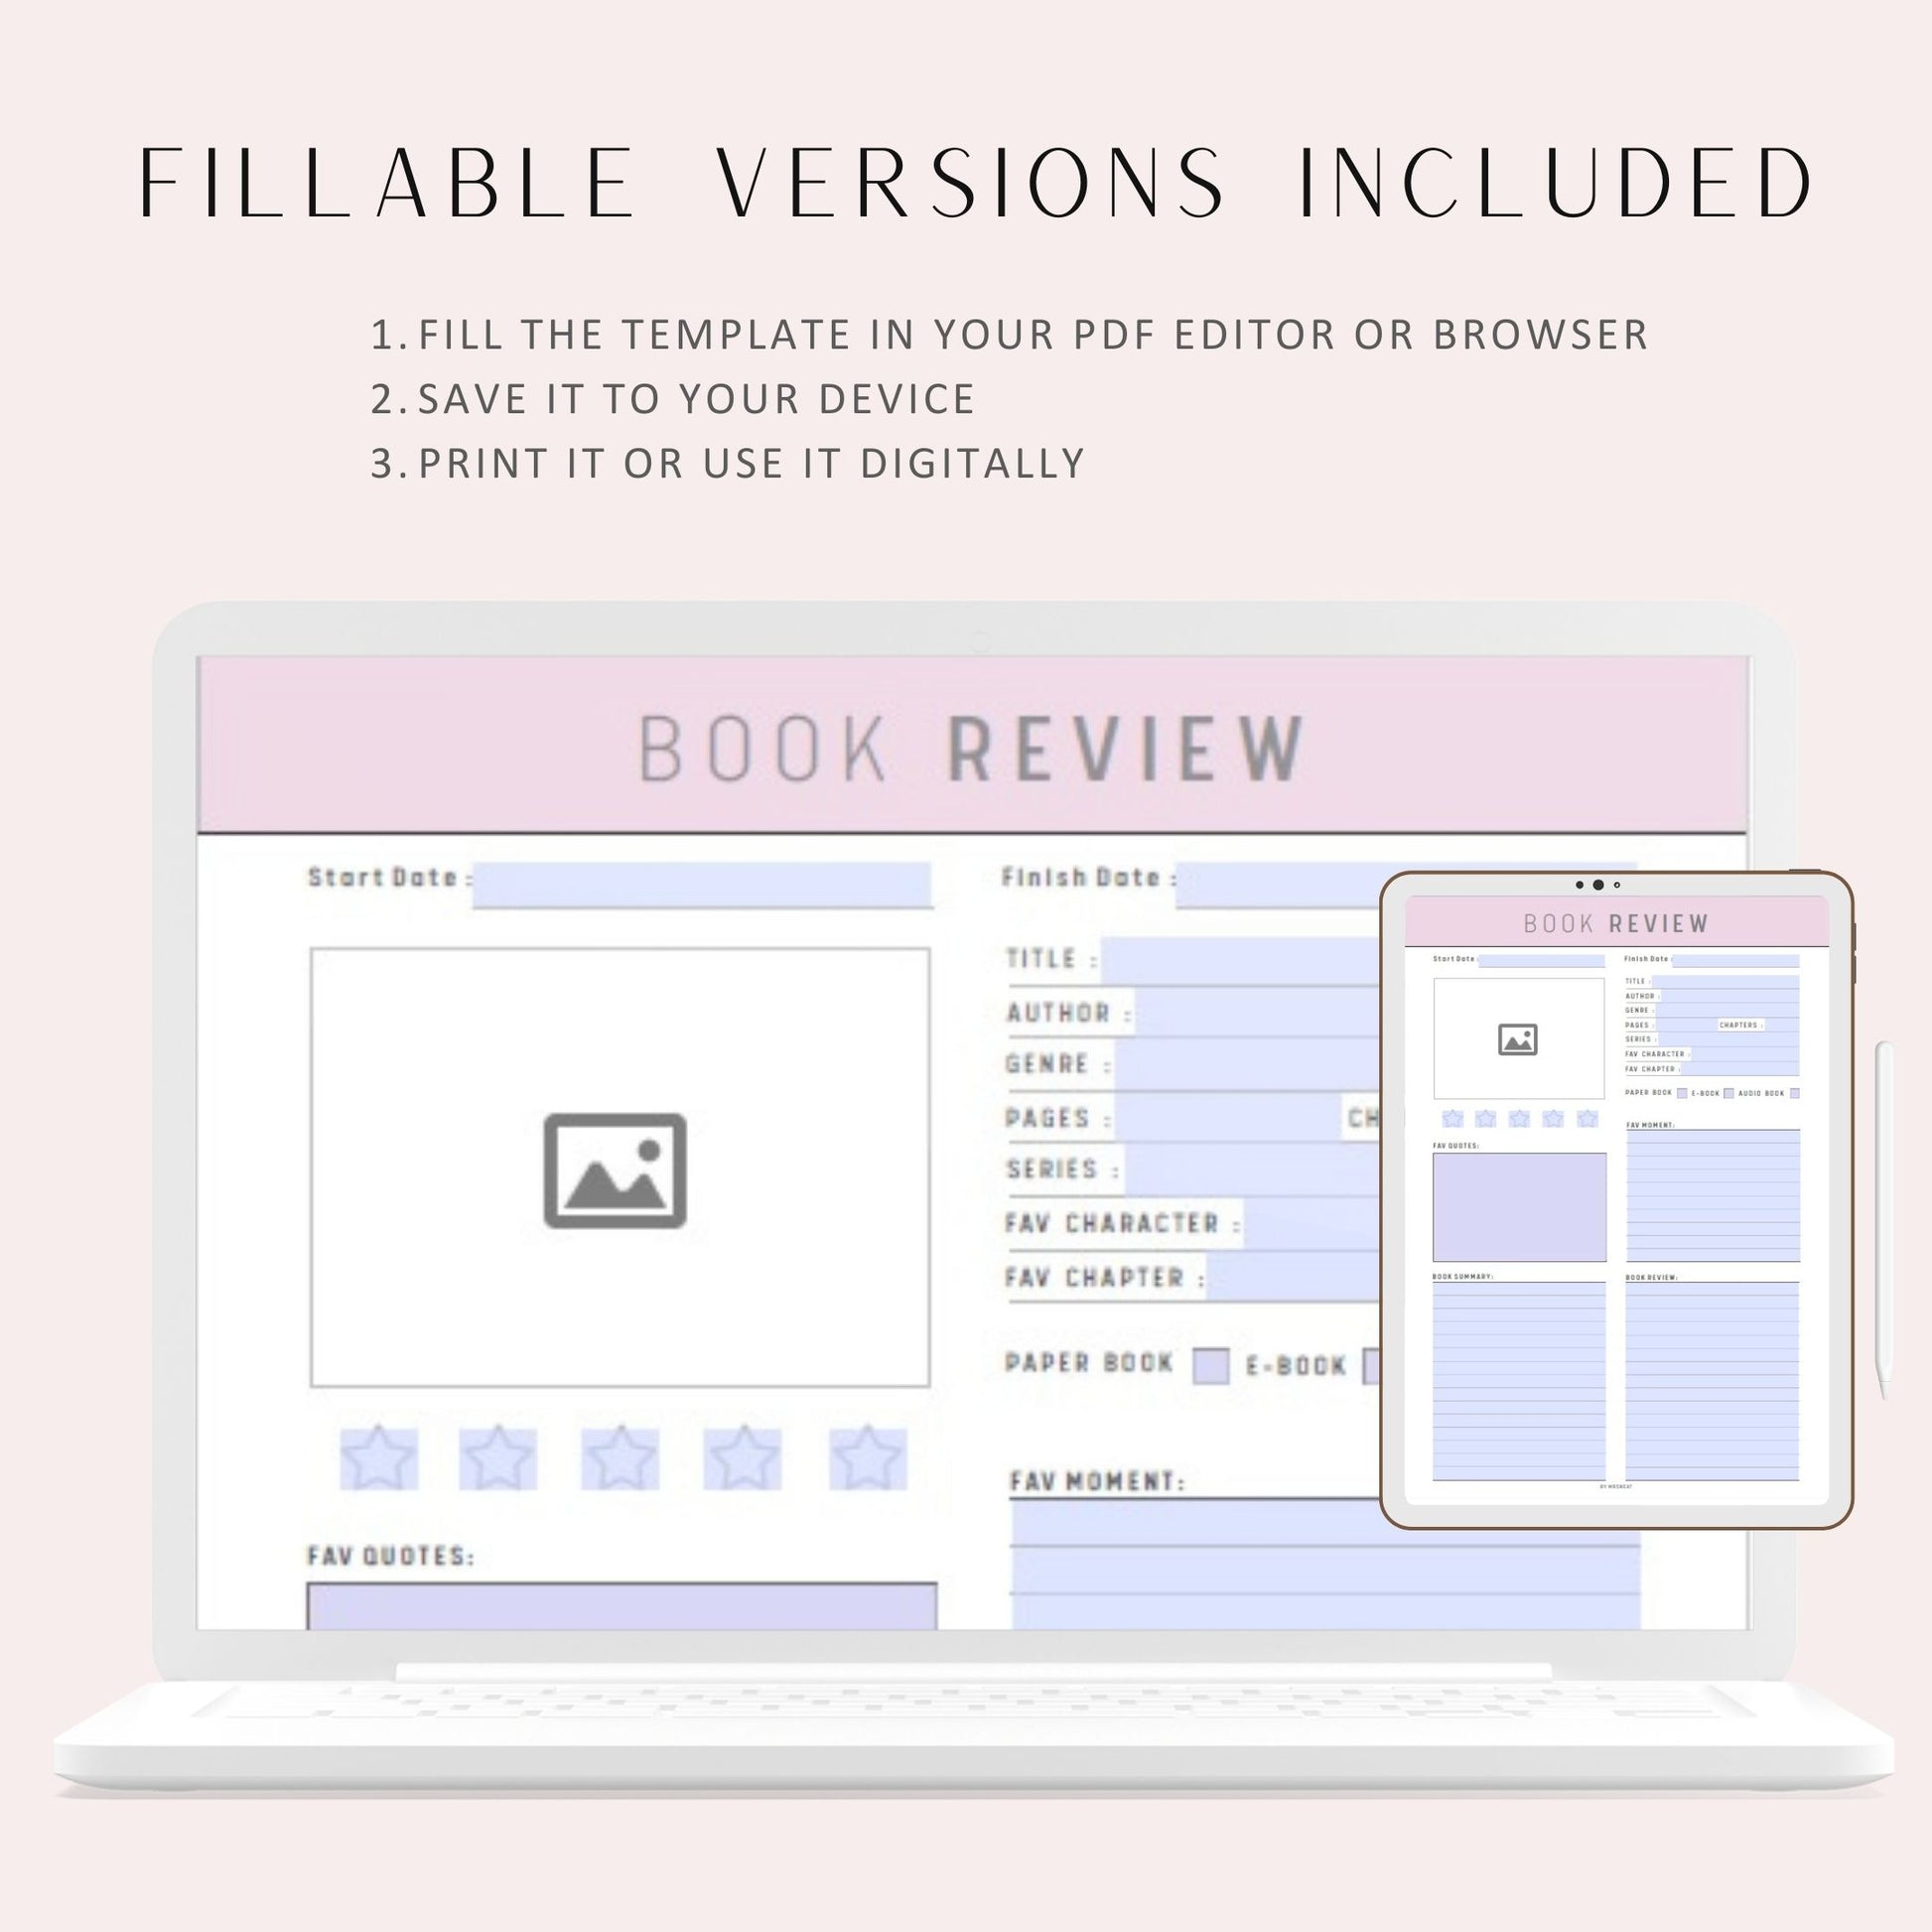 Book Review Template Printable, 2 versions, A4, A5, Letter, Half Letter, Blue, Green, Peach, Pink, White, Fillable PDF, Printable inserts